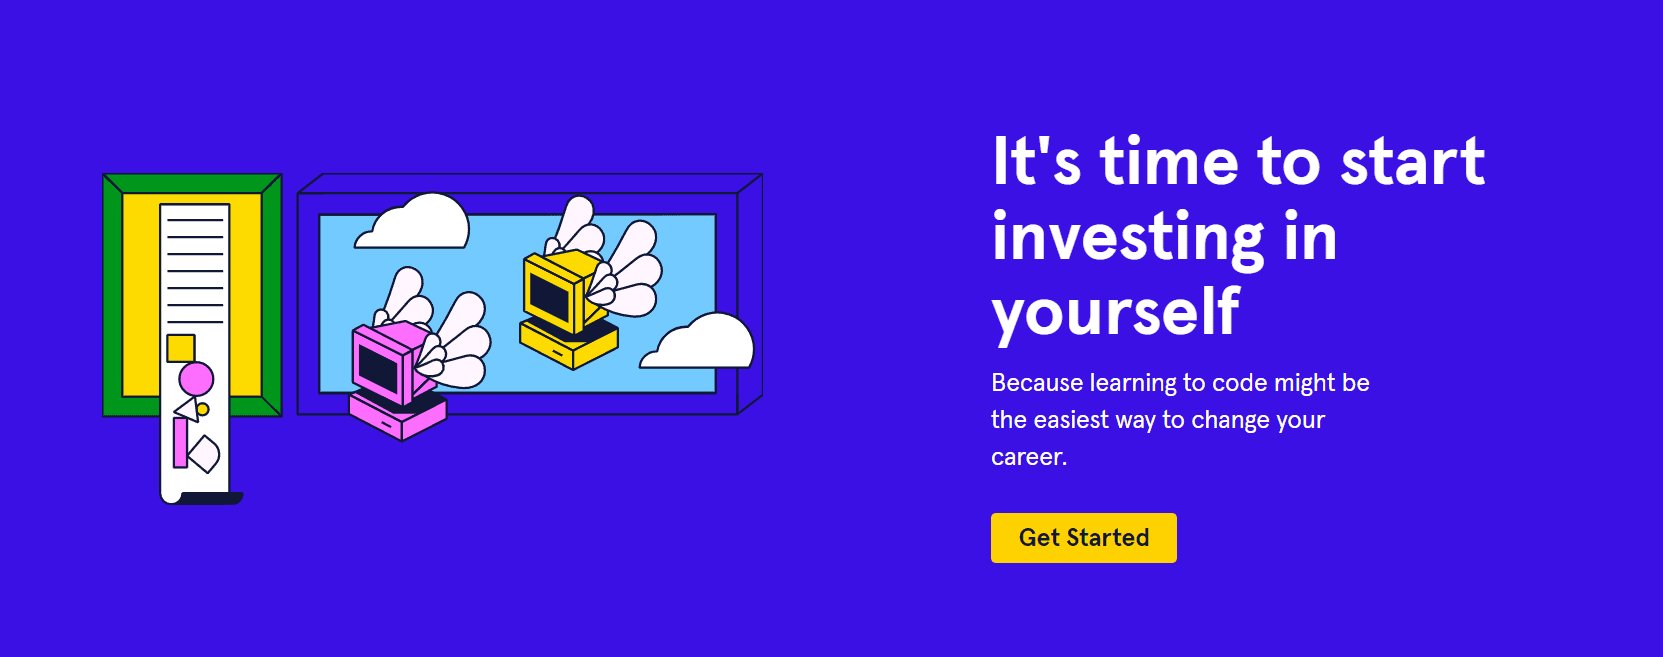 It's time to start investing in yourself - Codecademy Black Friday Deals